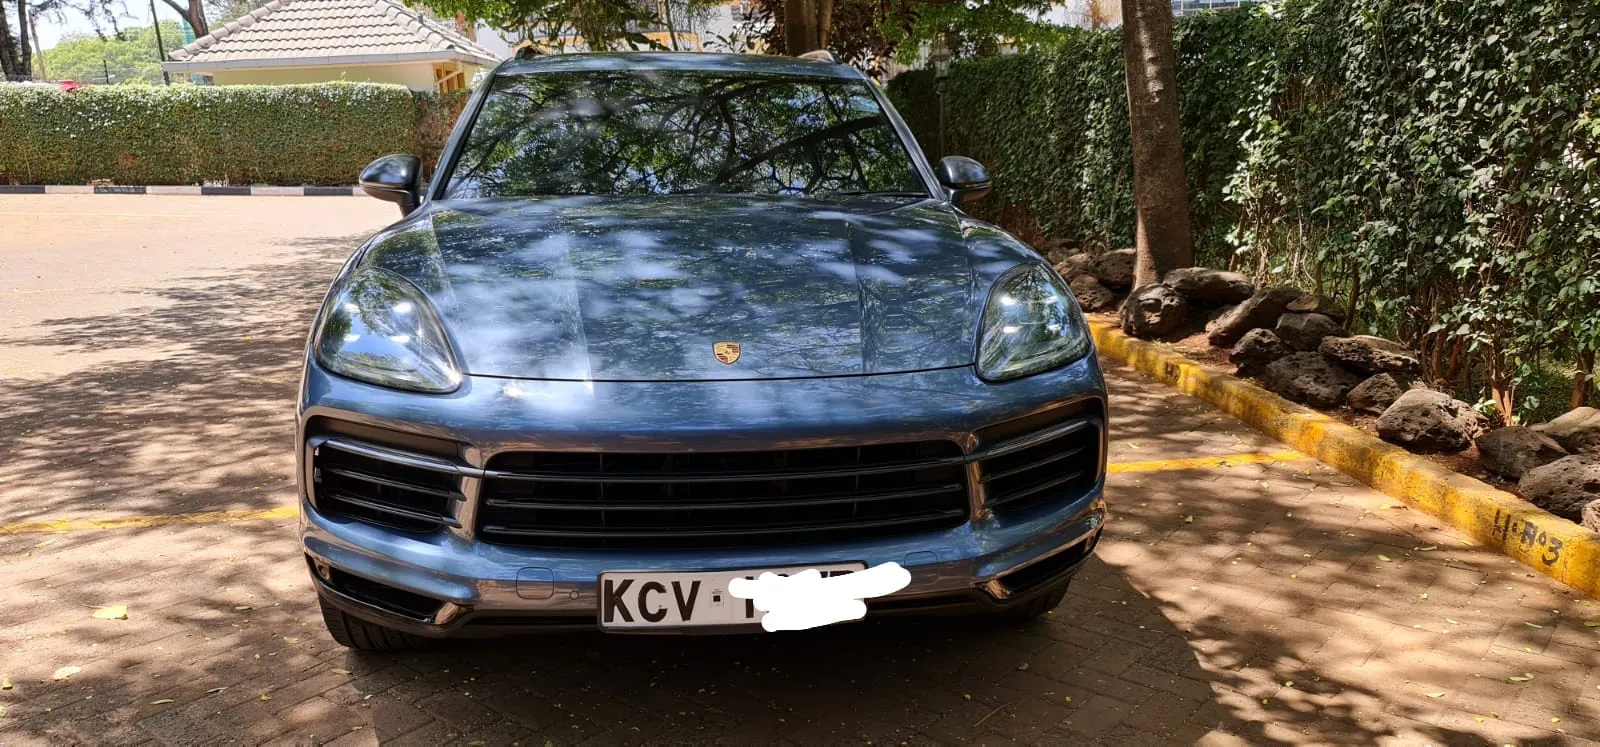 Porsche Cayenne 2019 fully loaded QUICK SALE PAY 40% DEPOSIT Trade in OK EXCLUSIVE